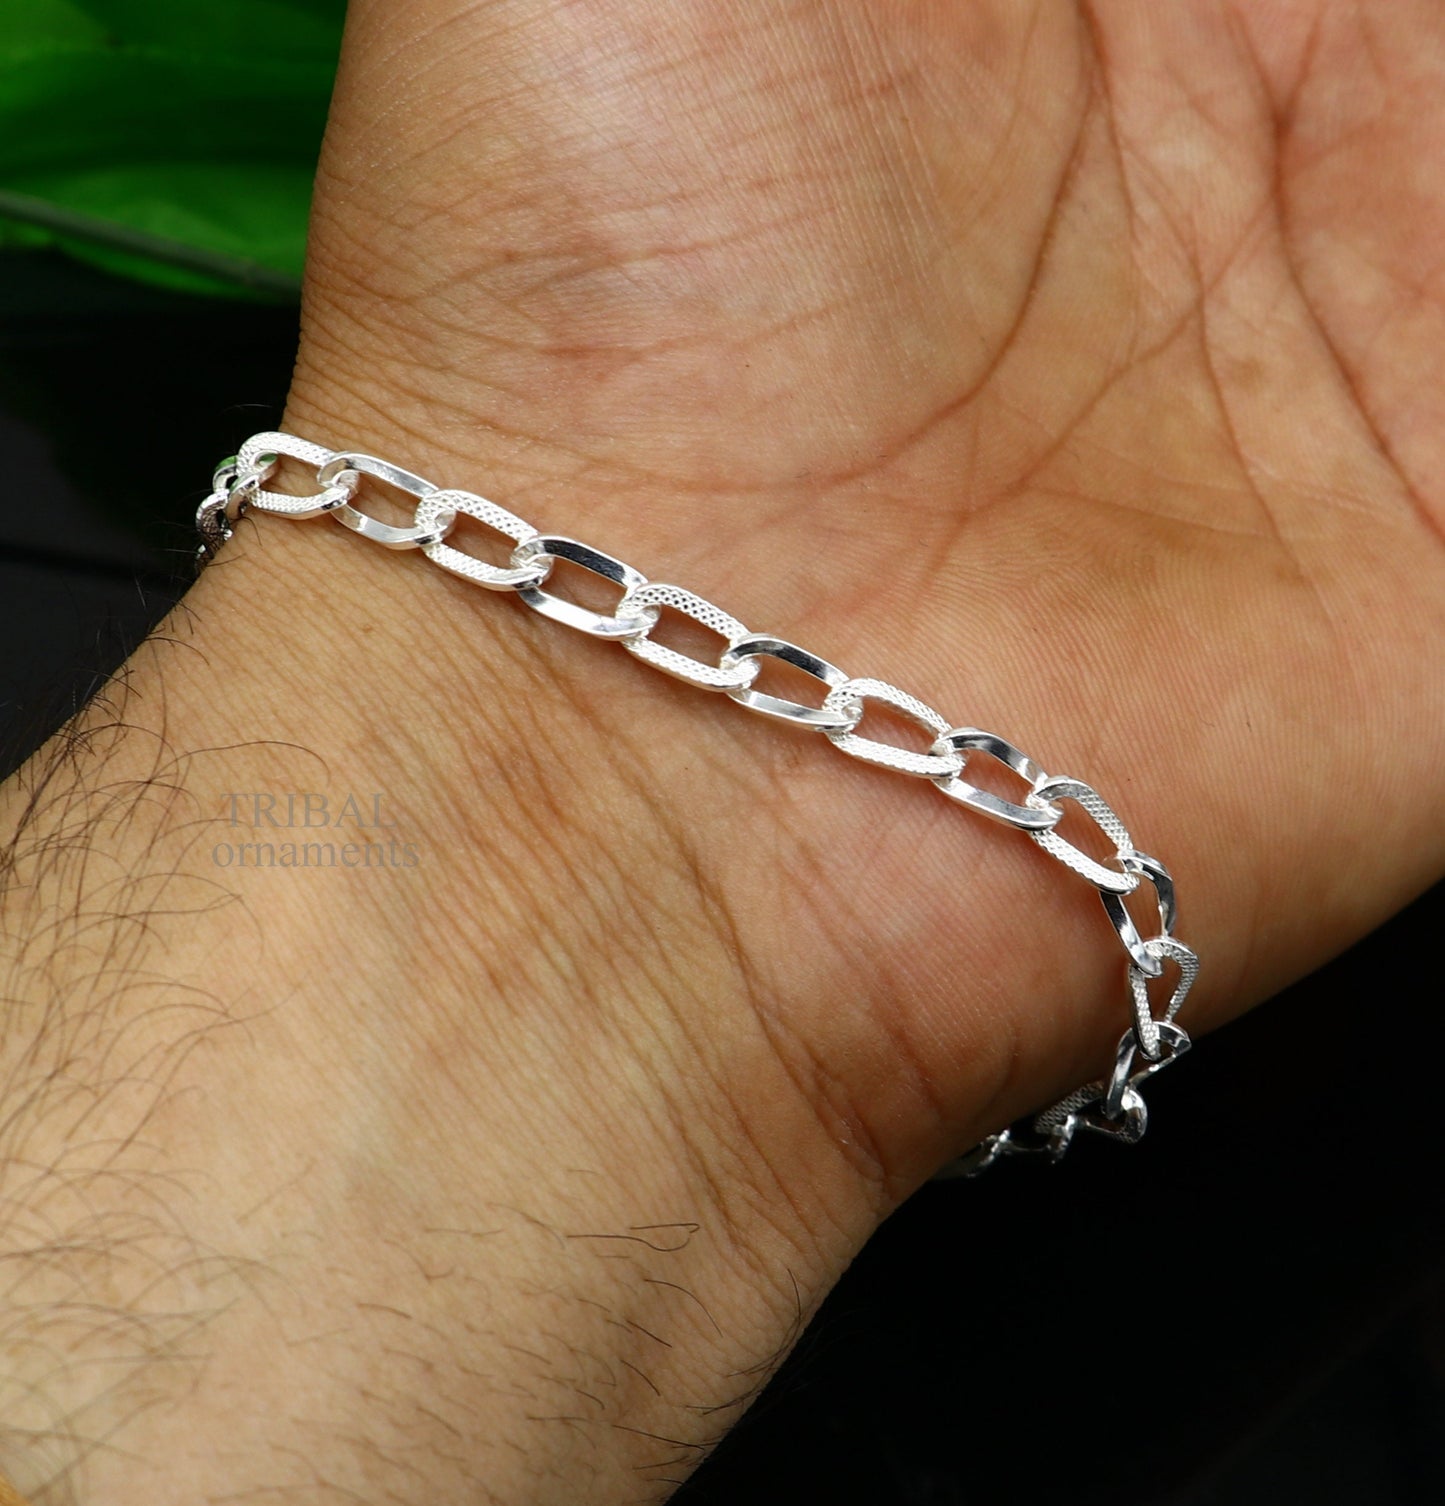 Exclusive 925 sterling silver handmade Bracelet for girl's, Dainty Silver Bracelet, Chain Bracelet, Minimal Jewelry, Gift For Women nsbr519 - TRIBAL ORNAMENTS